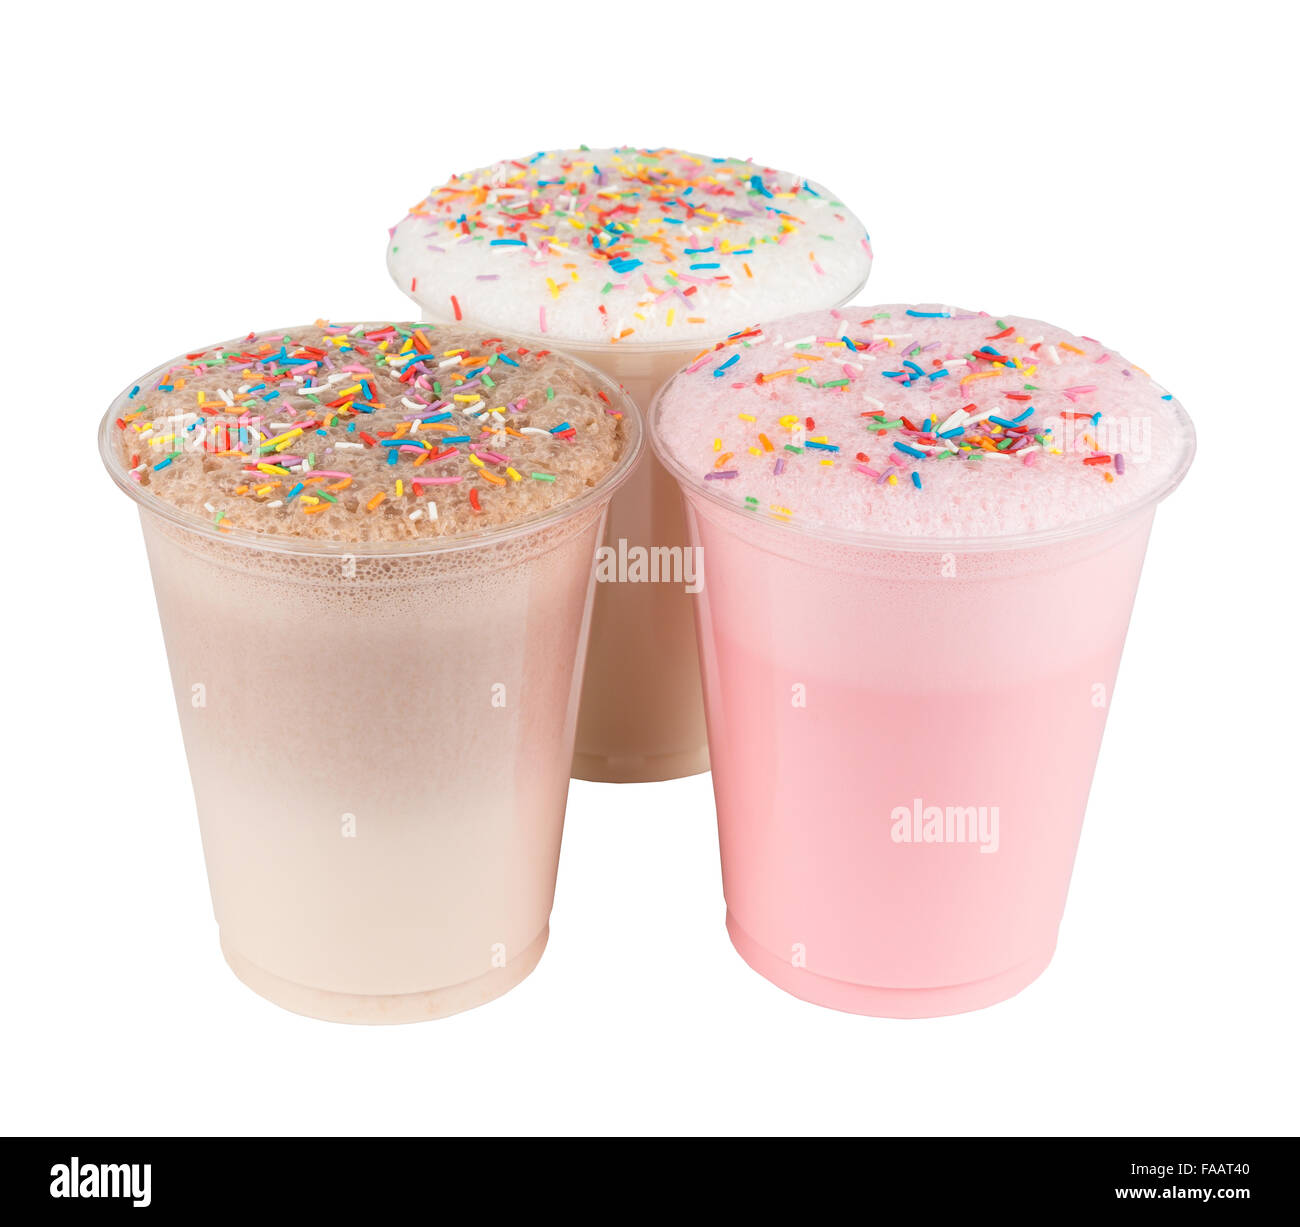 https://c8.alamy.com/comp/FAAT40/different-milkshake-cocktails-with-bubbles-and-multicolor-bakery-sweet-FAAT40.jpg